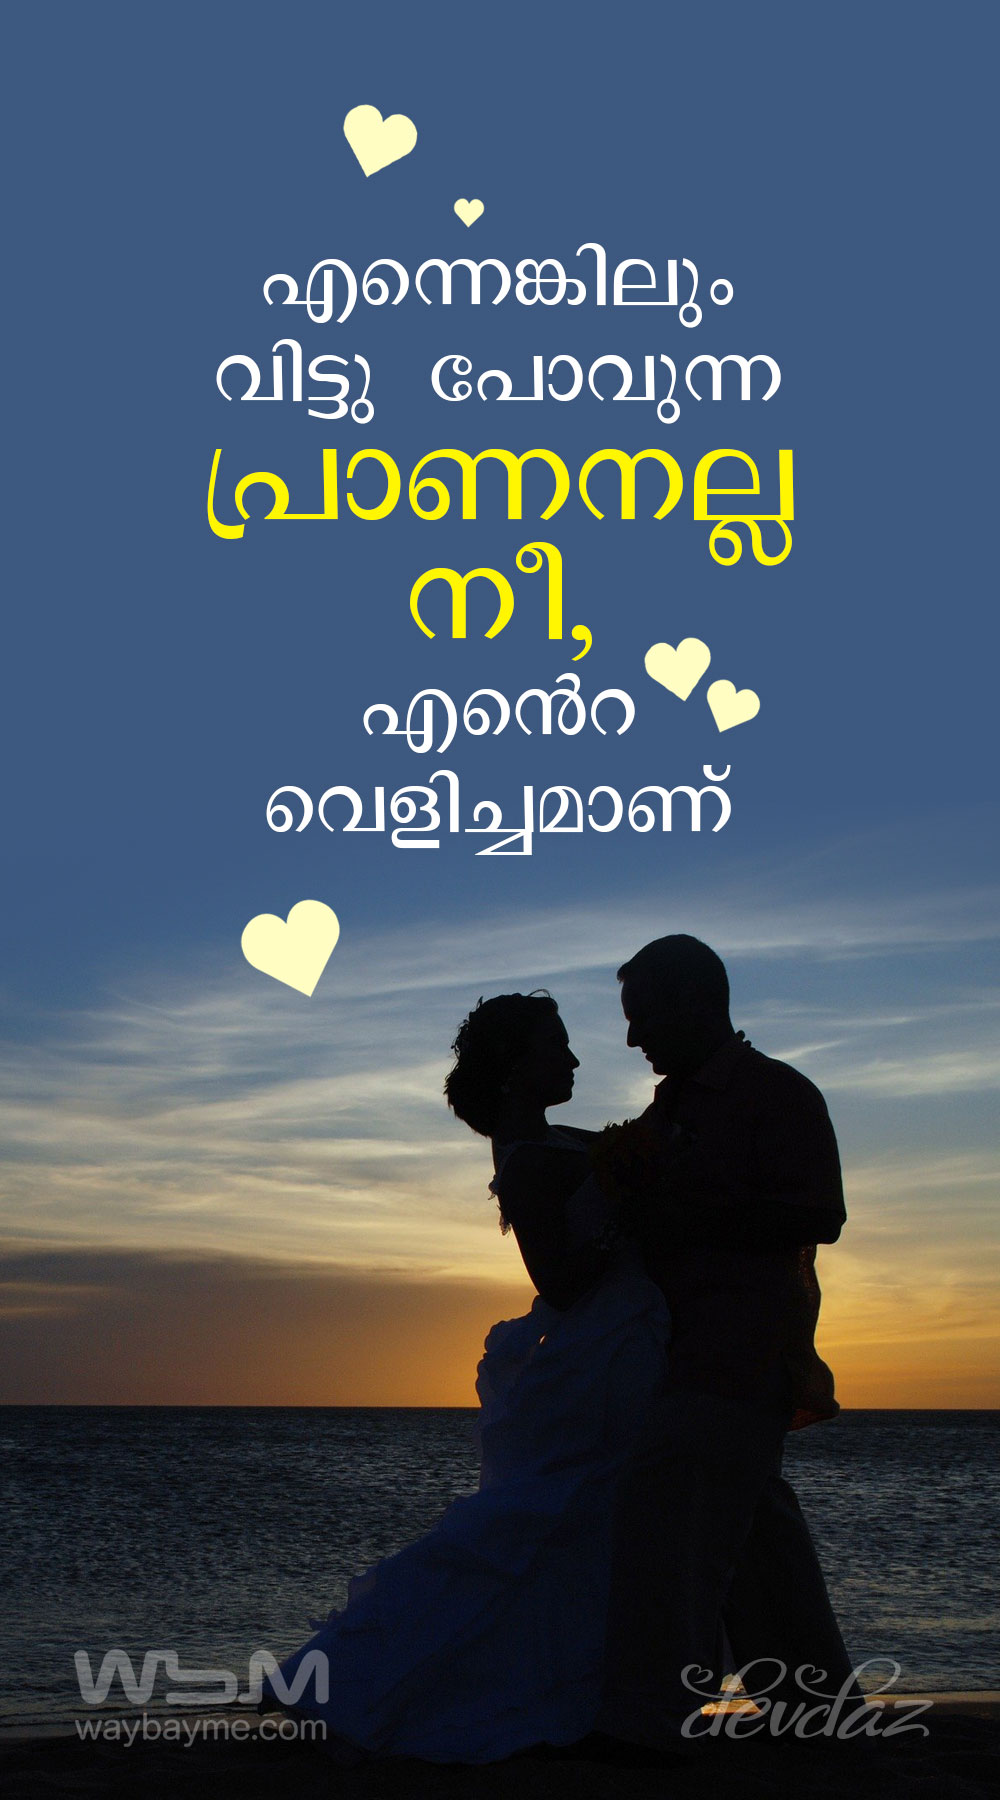 malayalam love quotes, motivational quotes in malayalam, friendship quotes in malayalam, malayalam captions for instagram, malayalam love quotes text, love quotes in malayalam for husband, love quotes english text, love thoughts english, loving words in malayalam, propose day malayalam quotes, malayalam love letter, malayalam status in english, love quotes malayalam facebook, love quotes malayalam text, romantic love quotes, love quotes for him, pranayam images malayalam, love captions english, malayalam status love, sad love images in malayalam, pranaya dialogues malayalam, alone malayalam quotes, Malayalam pranayama, pranaya kathakal,pranayam